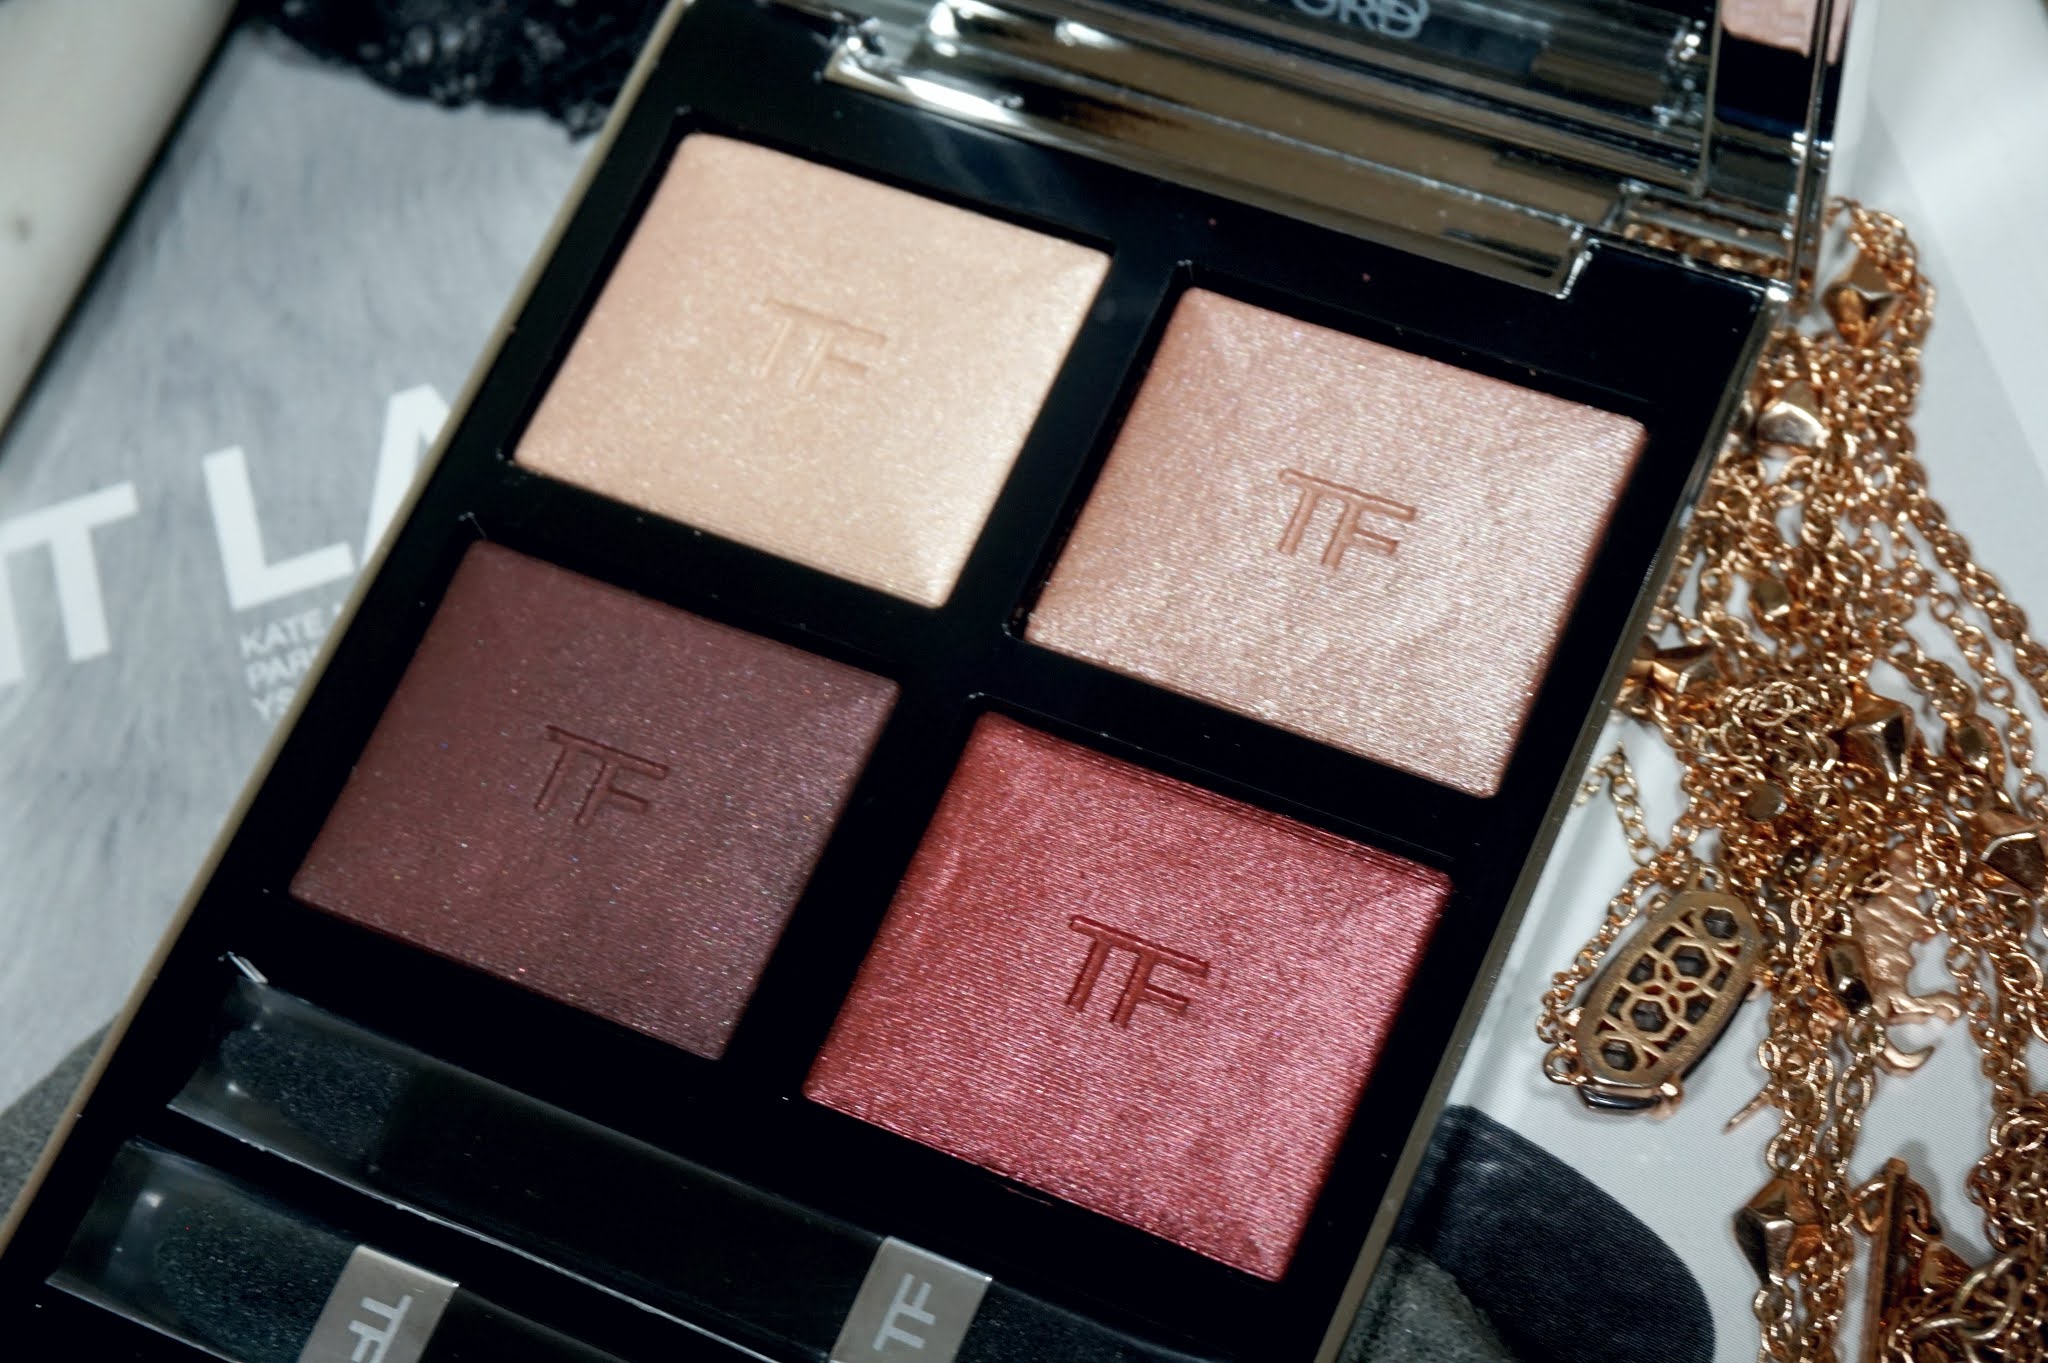 Tom Ford Extreme Eye Color Quad in Mercurial Review and Swatches